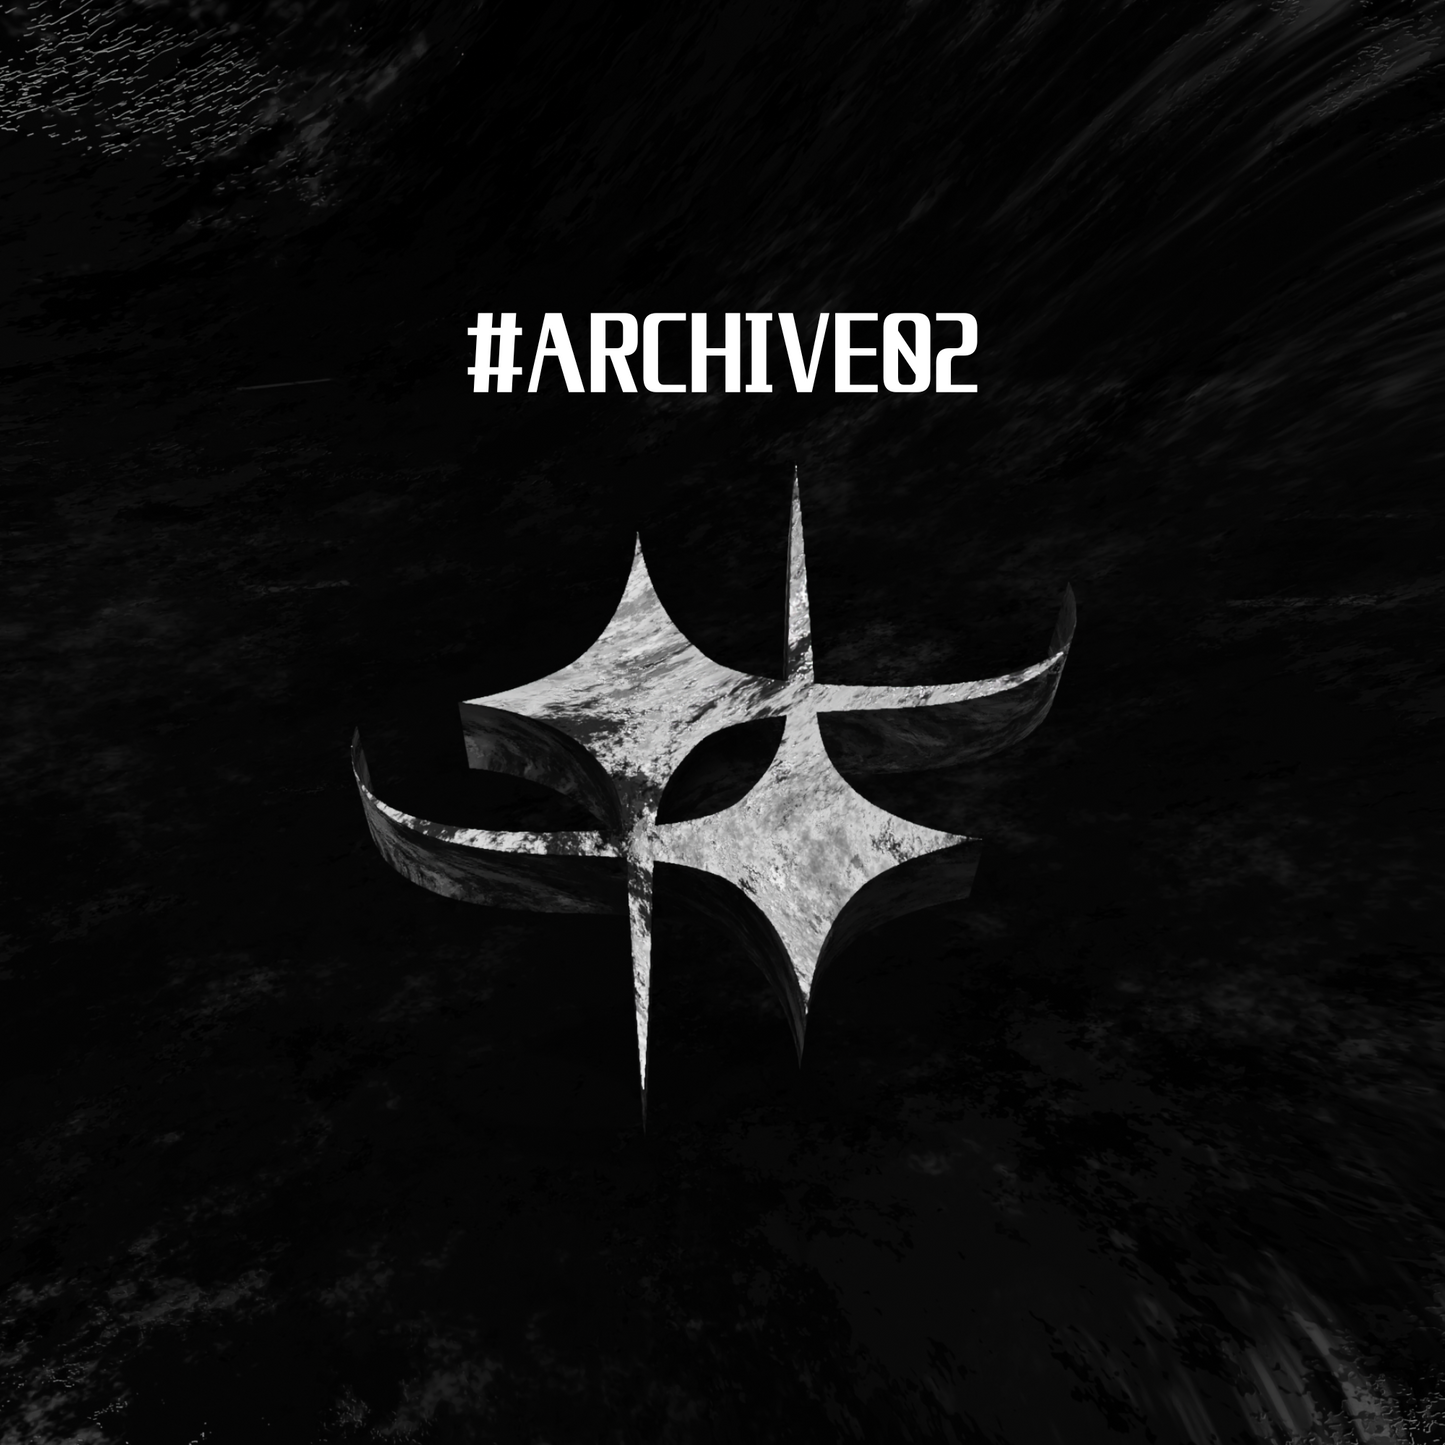 Archive02 coming soon.....